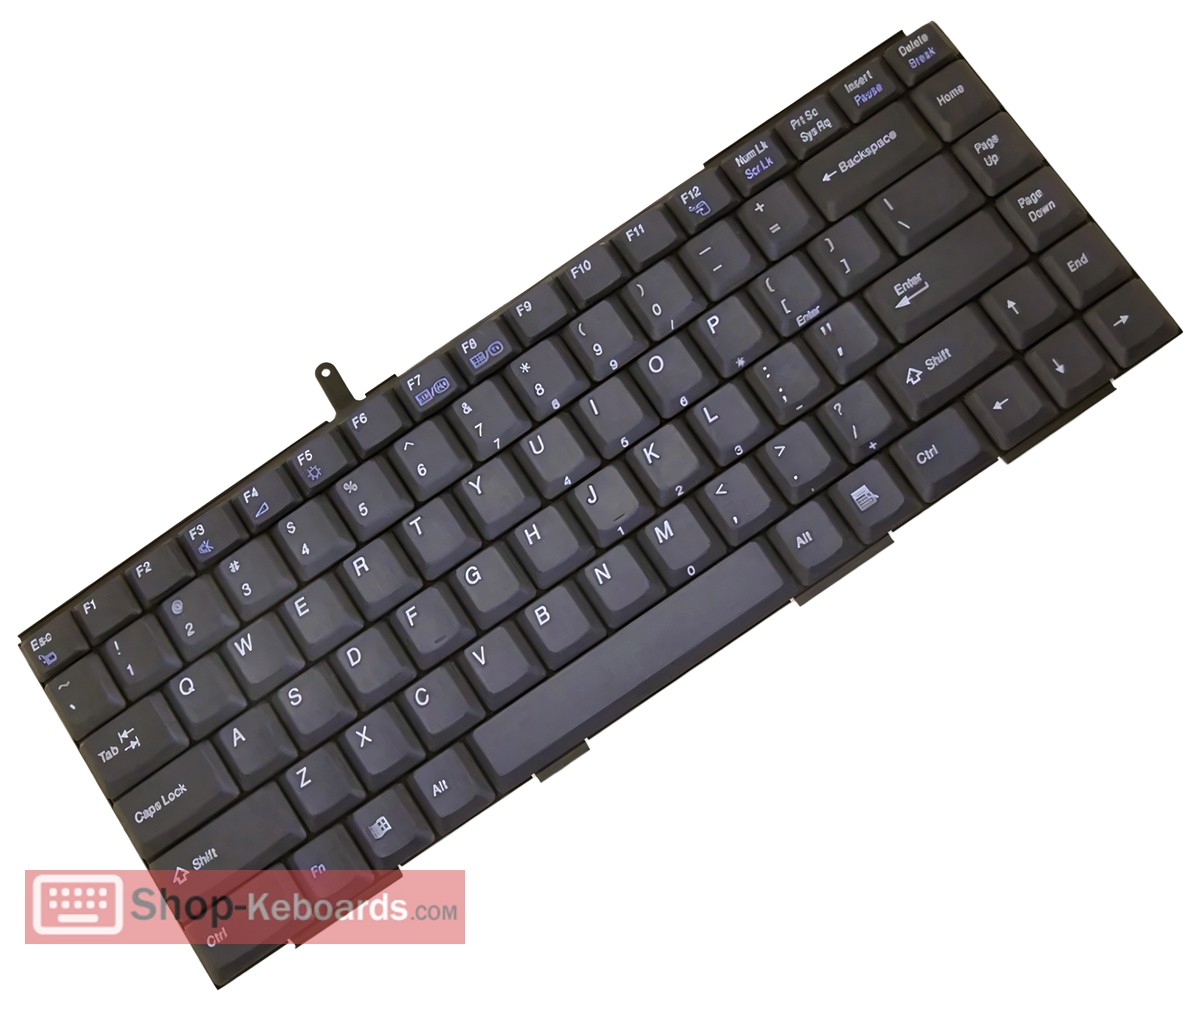 Sony VAIO PCG-F650K Keyboard replacement